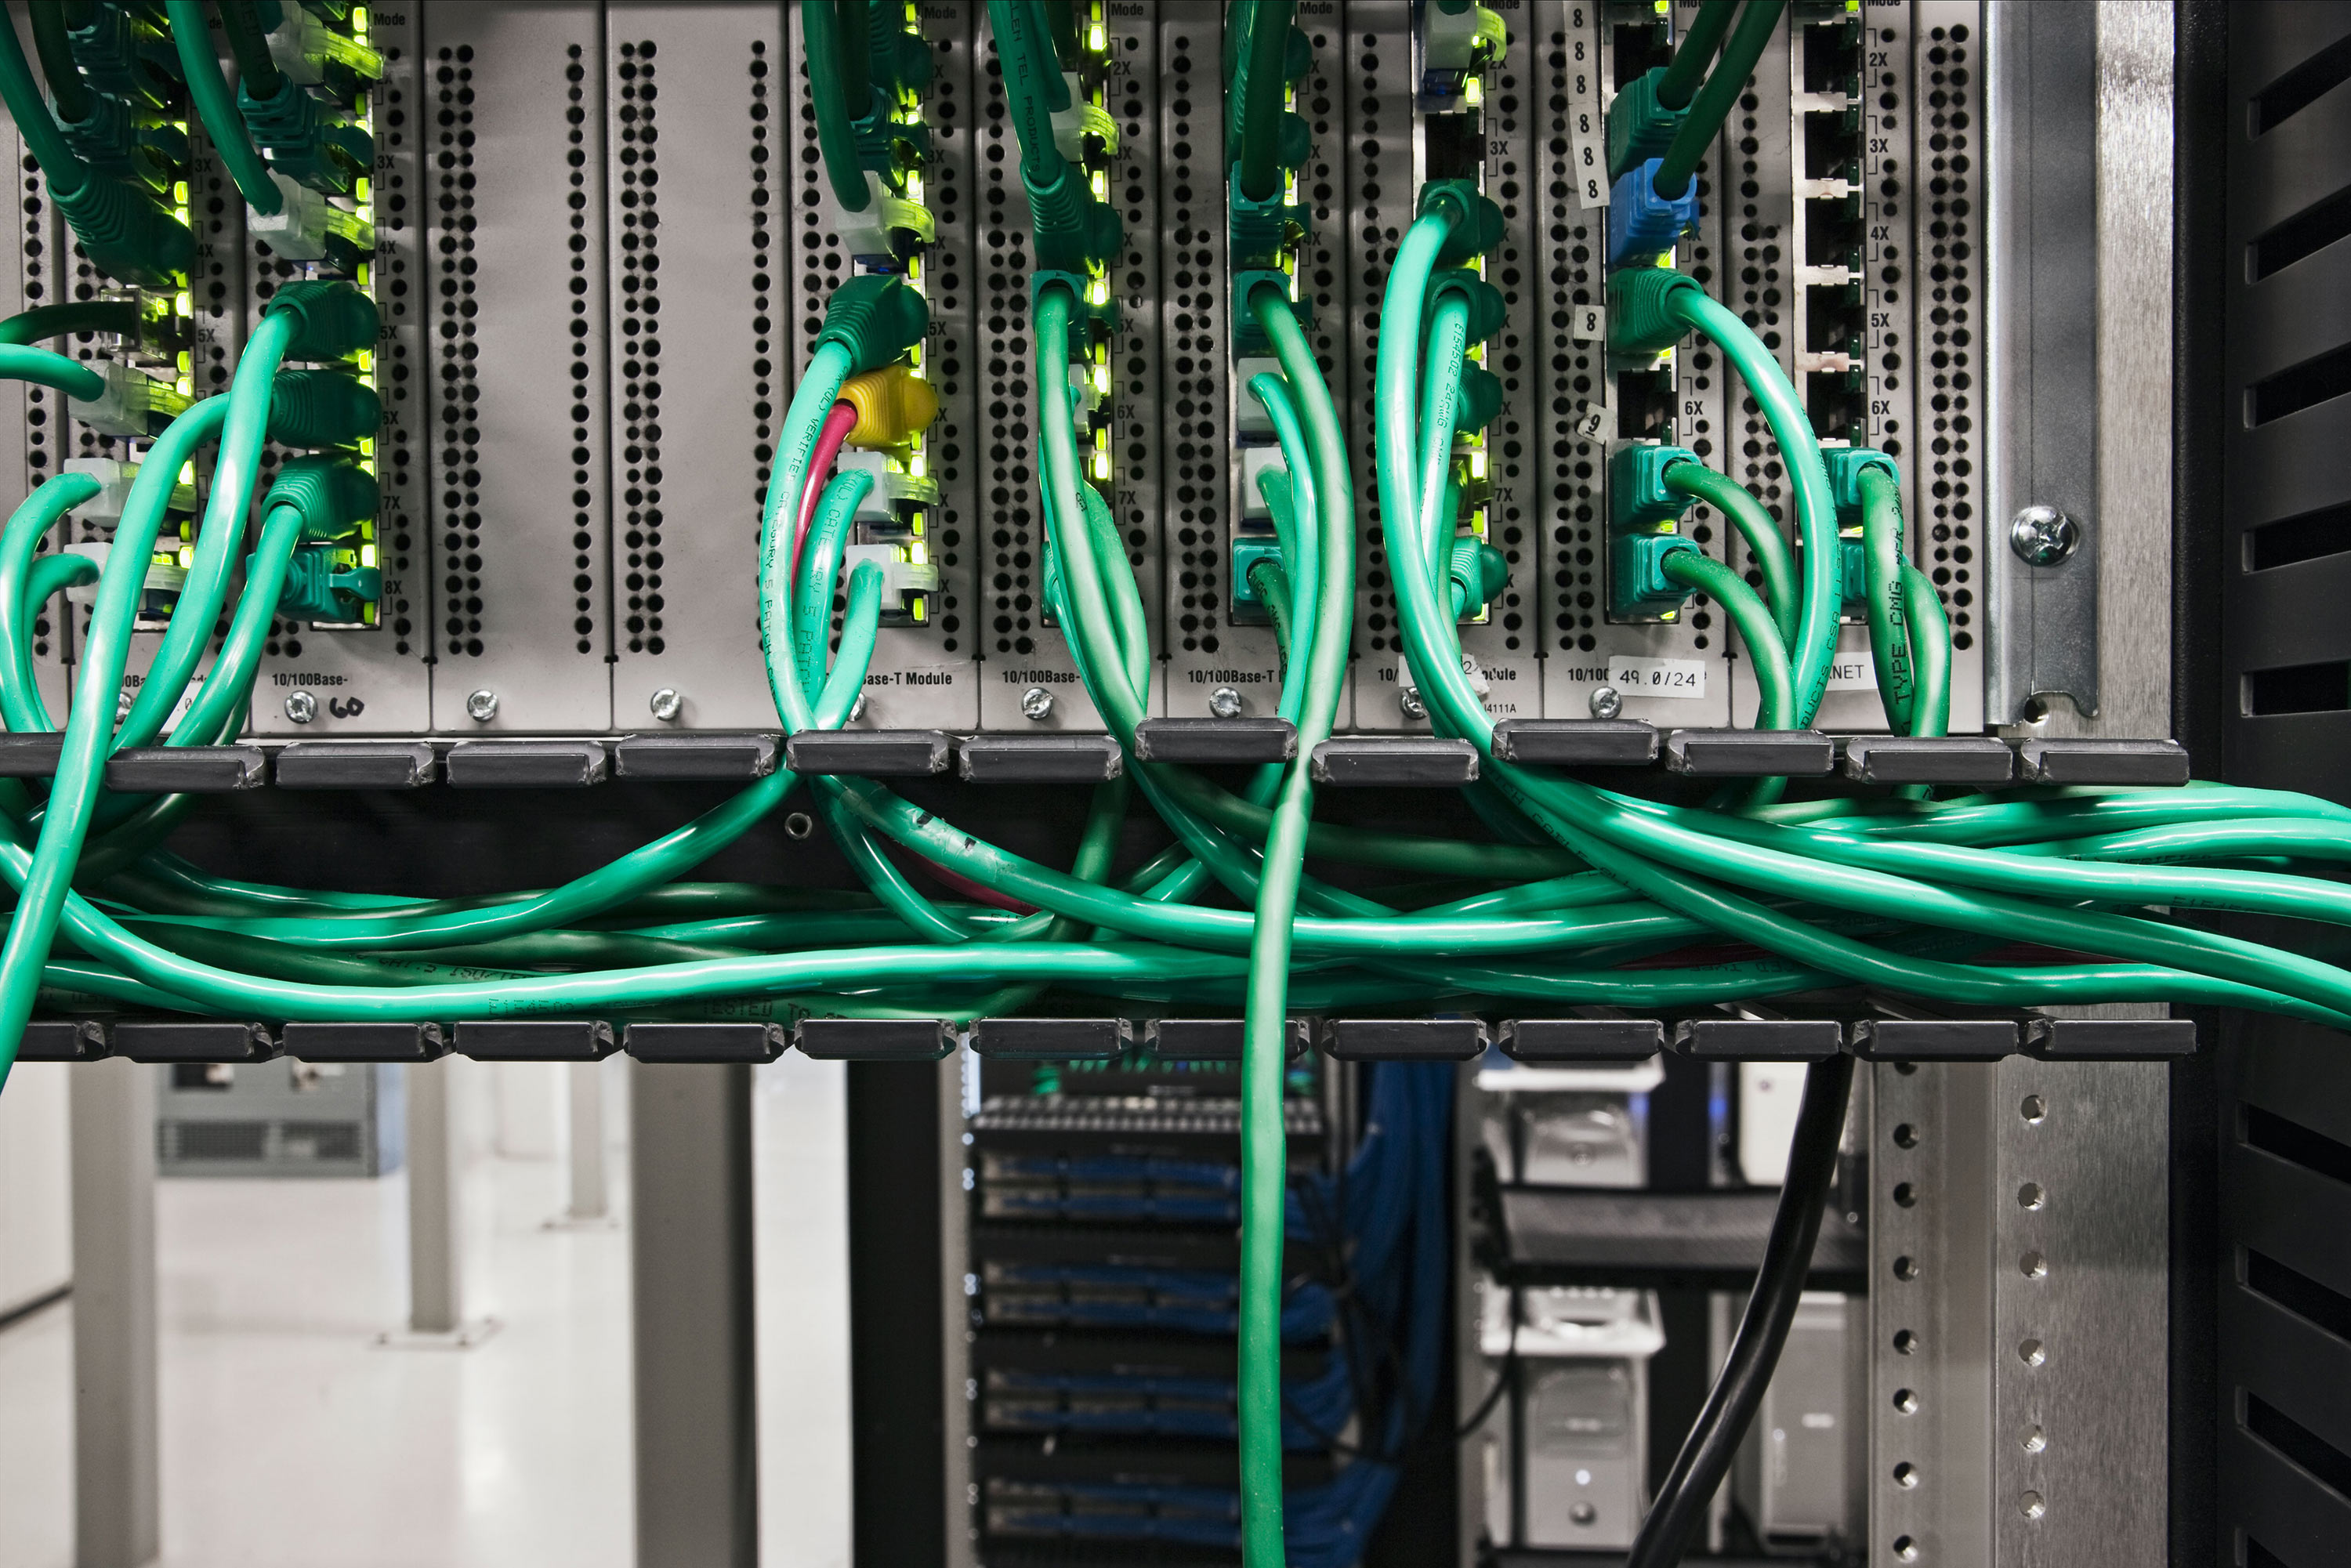 Networking cables and wires